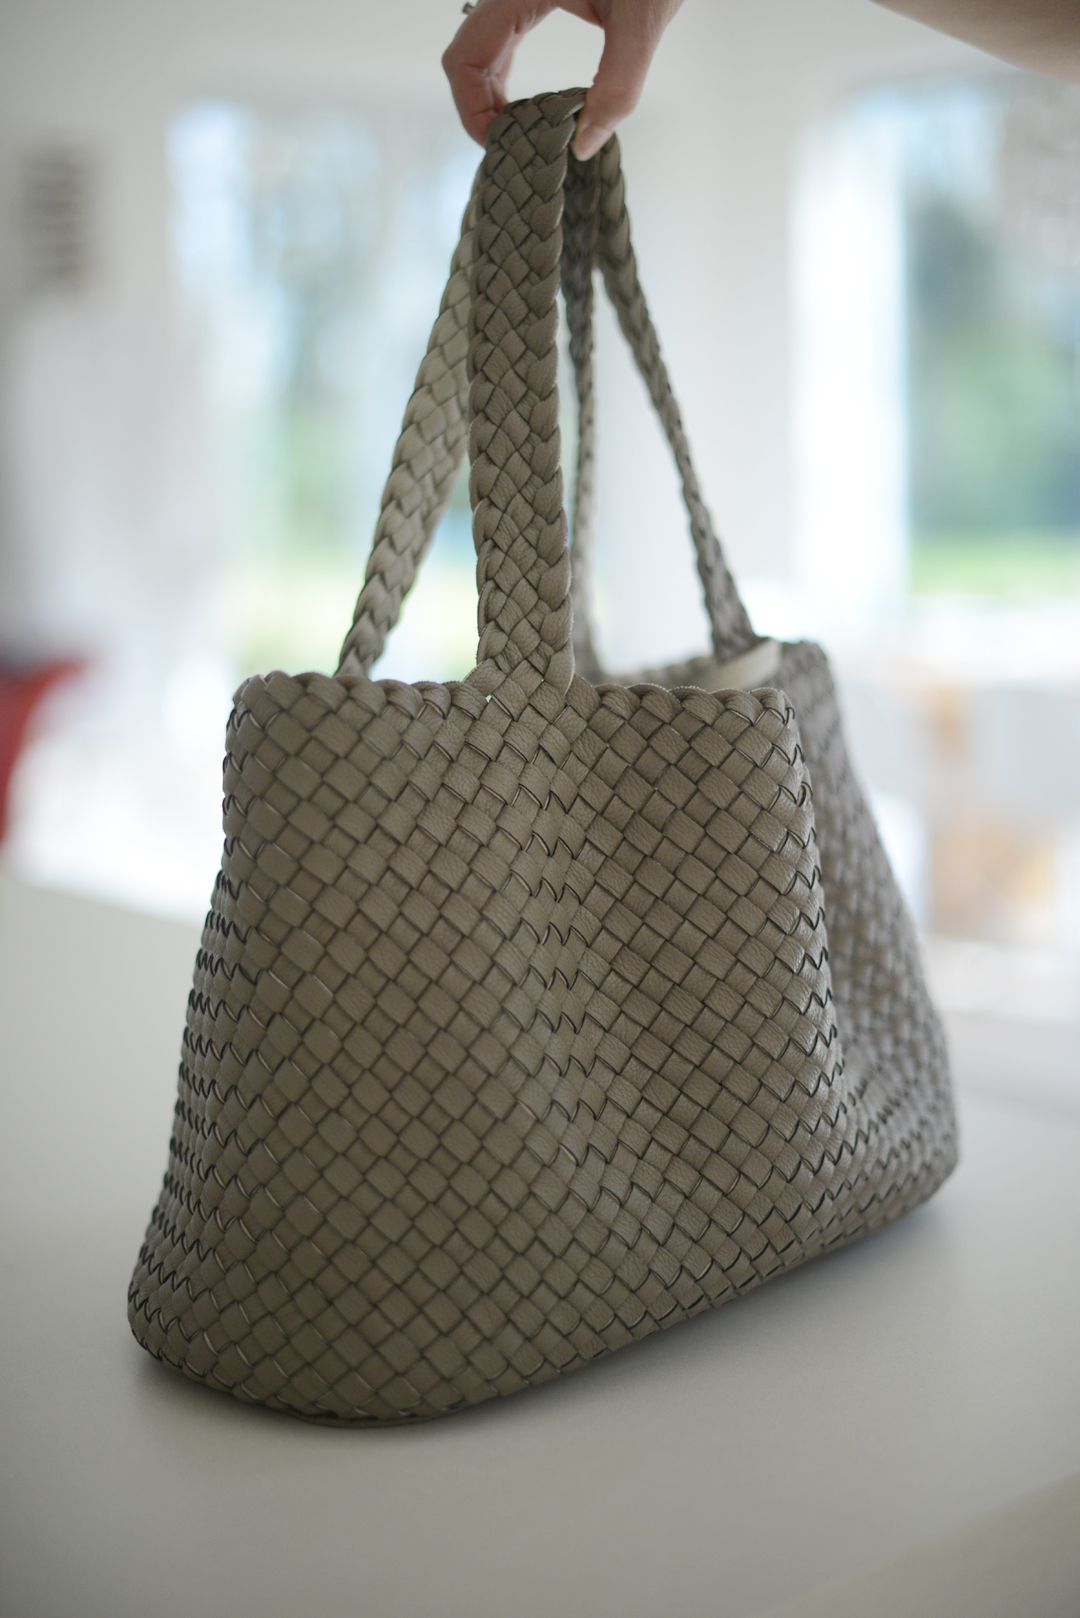 woven-accessories-notesfromastylist